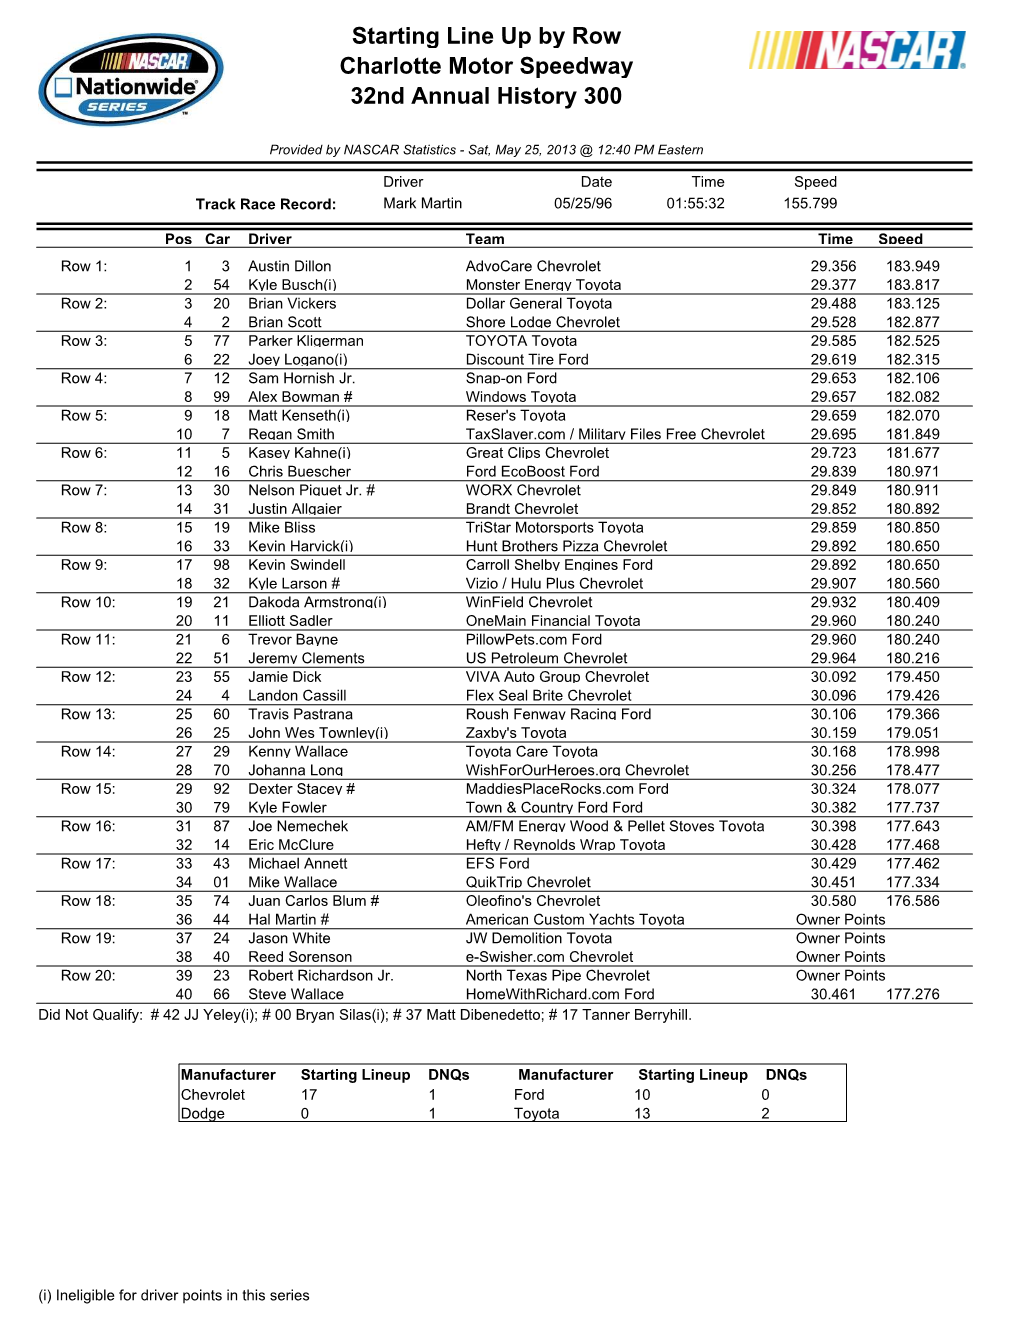 Starting Line up by Row Charlotte Motor Speedway 32Nd Annual History 300